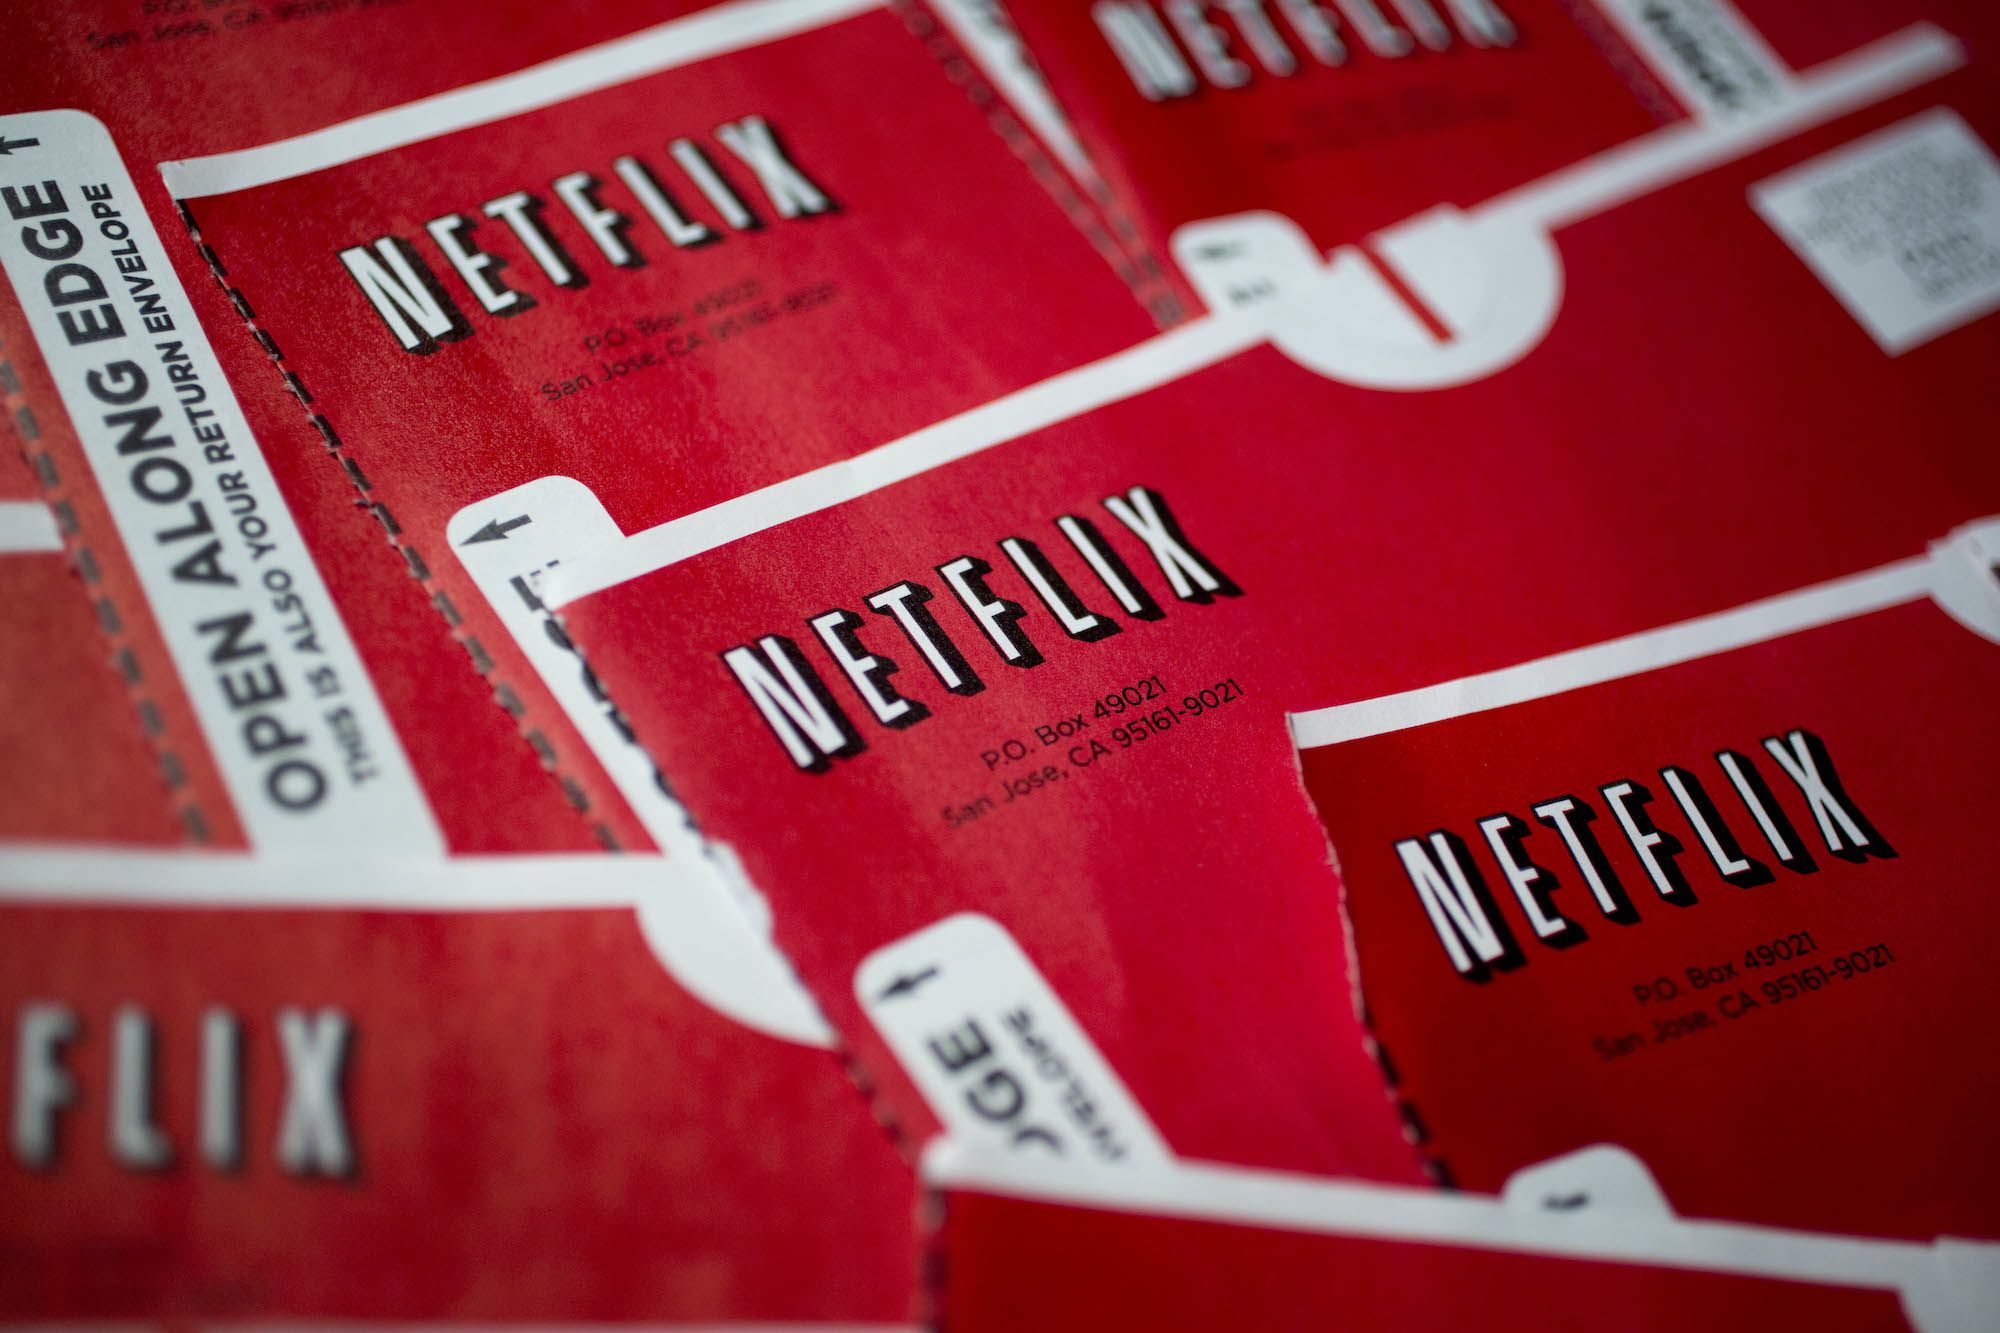 Where to rent DVDs and Blu-rays now that Netflix has quit